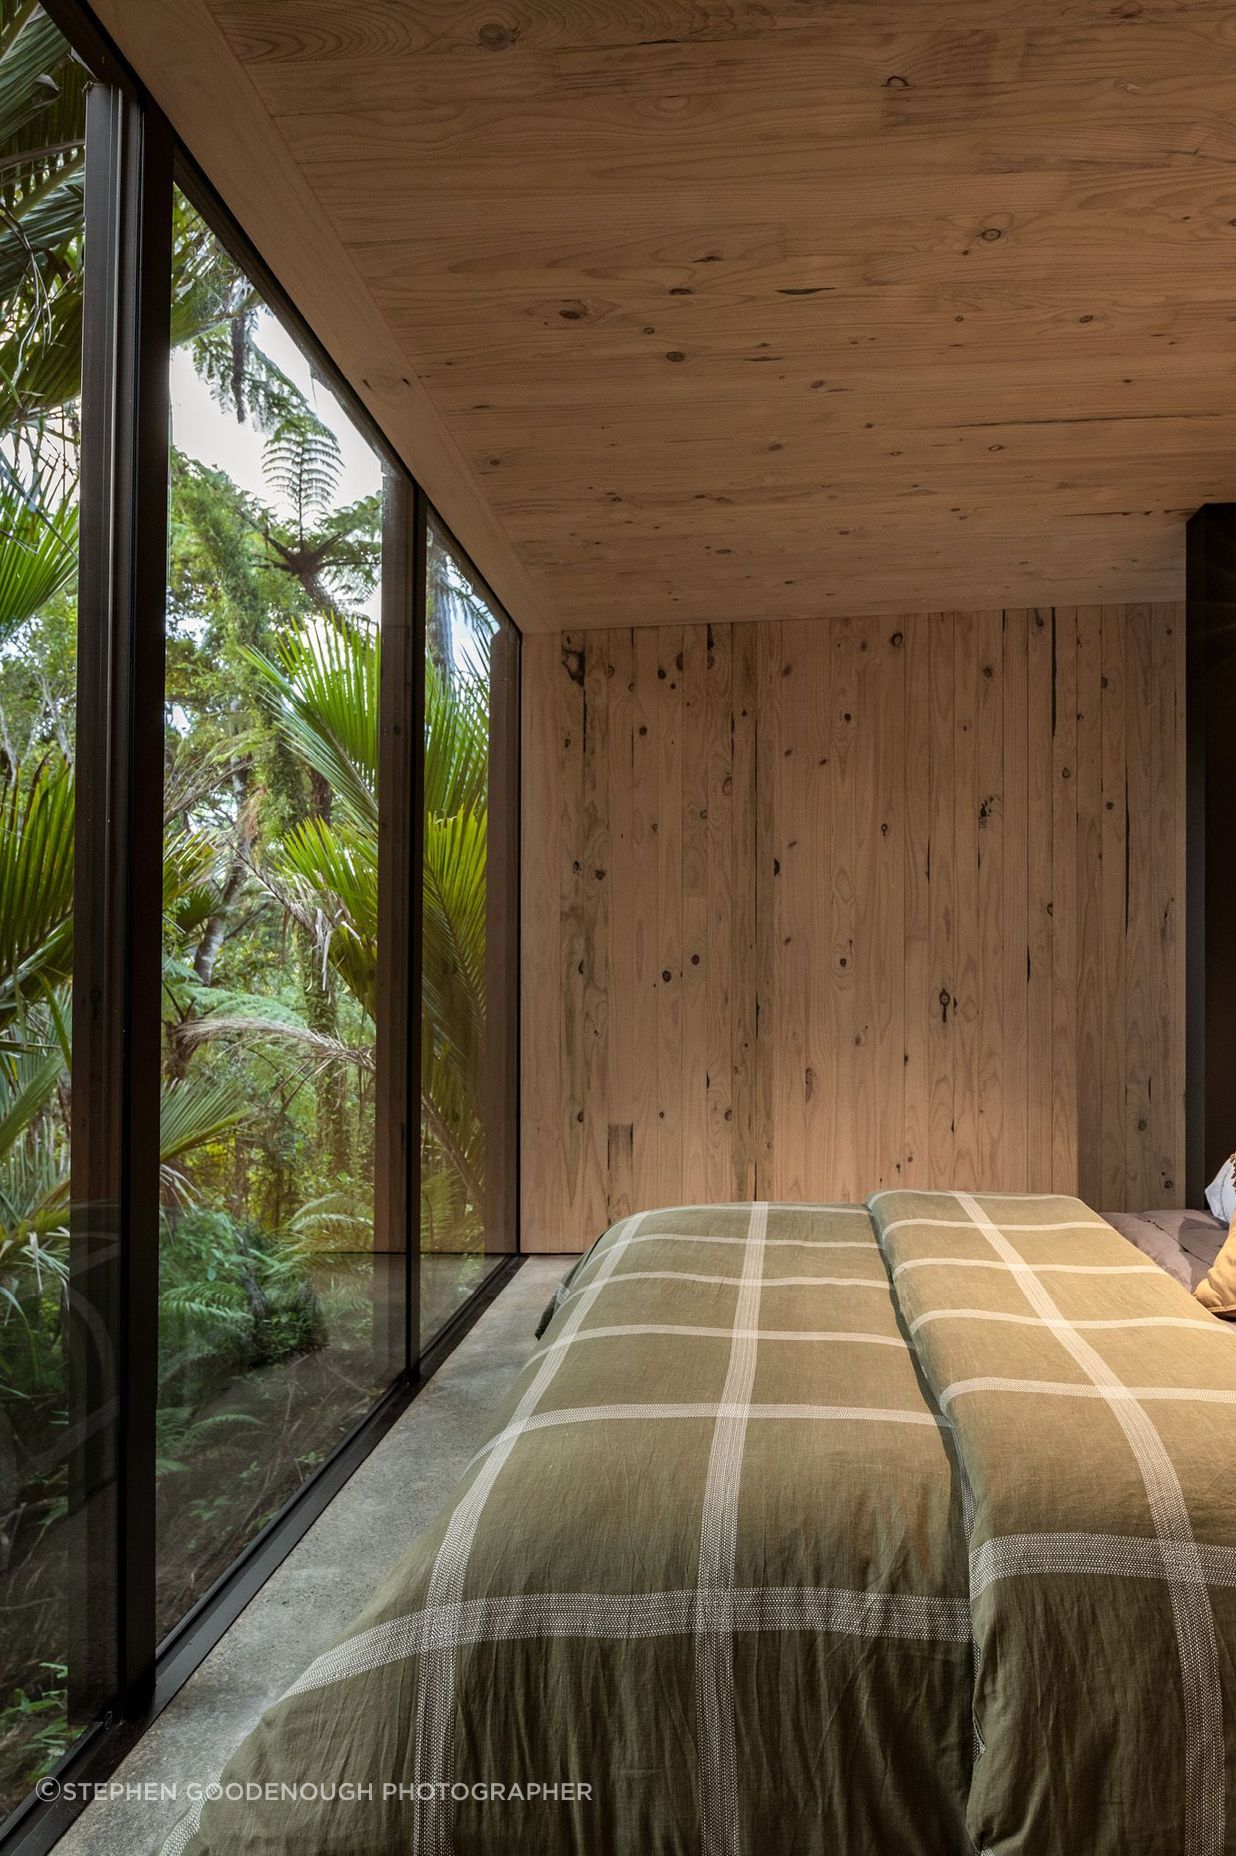 Extensive glazing in the bedroom connects visitors directly with the bush setting.